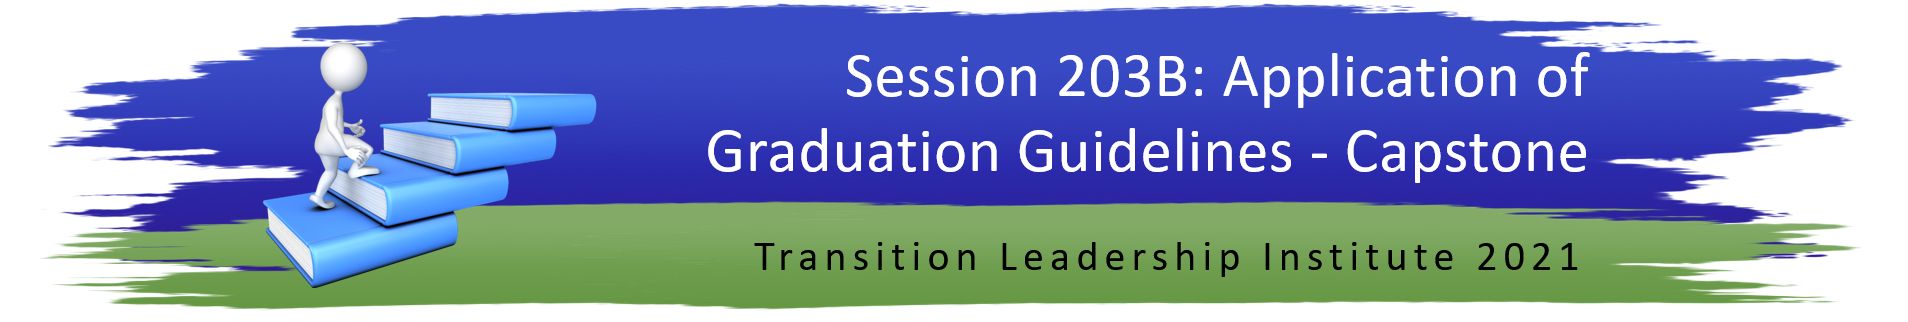 Session 203B: Application of Graduation Guidelines - Capstone